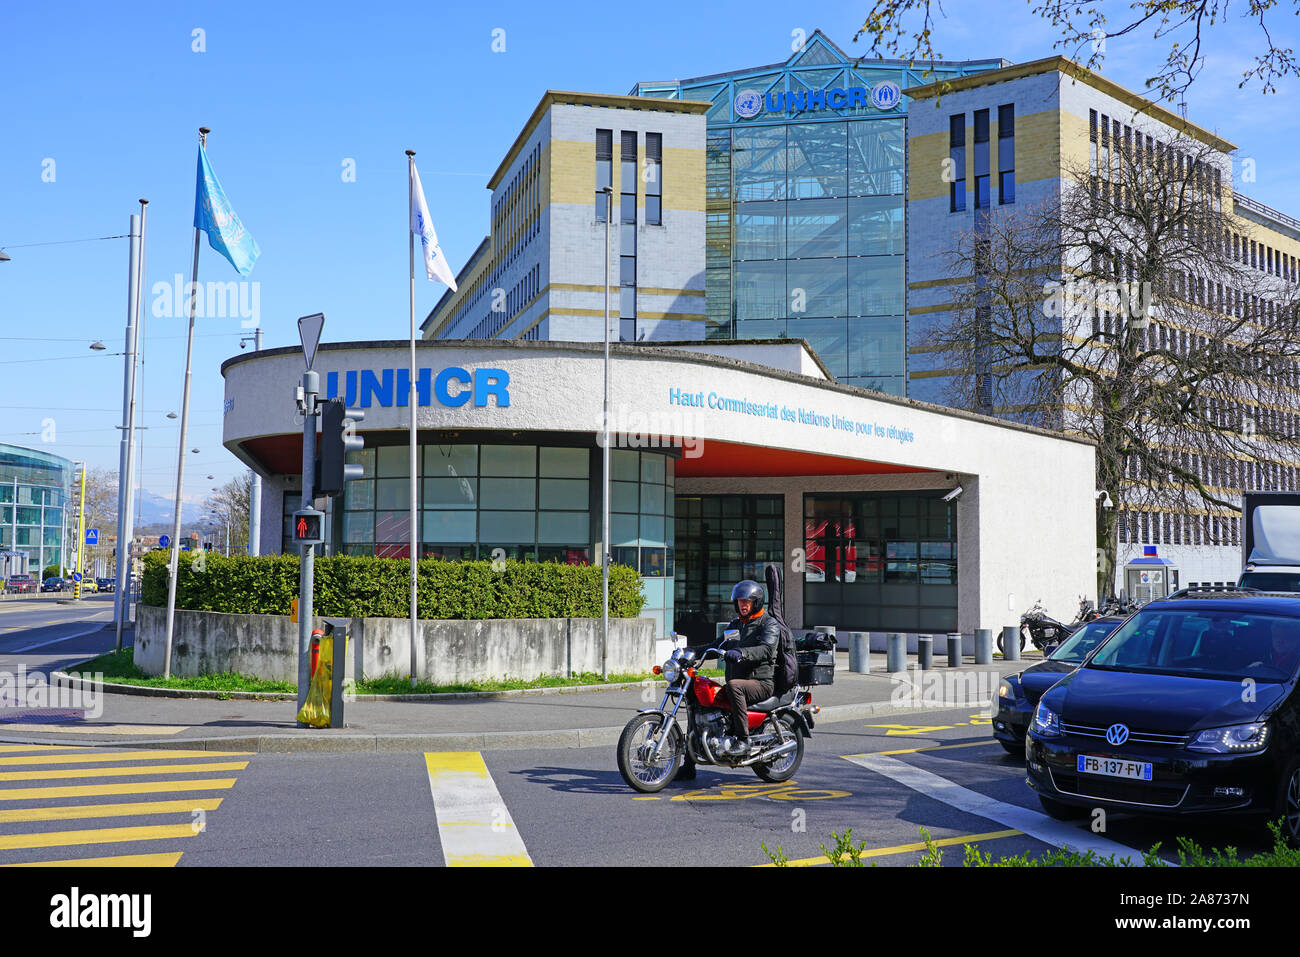 GENEVA, SWITZERLAND -5 APR 2019- Exterior view of the United Nations High Commissioner for Refugees (UNHCR), an international organization located in Stock Photo